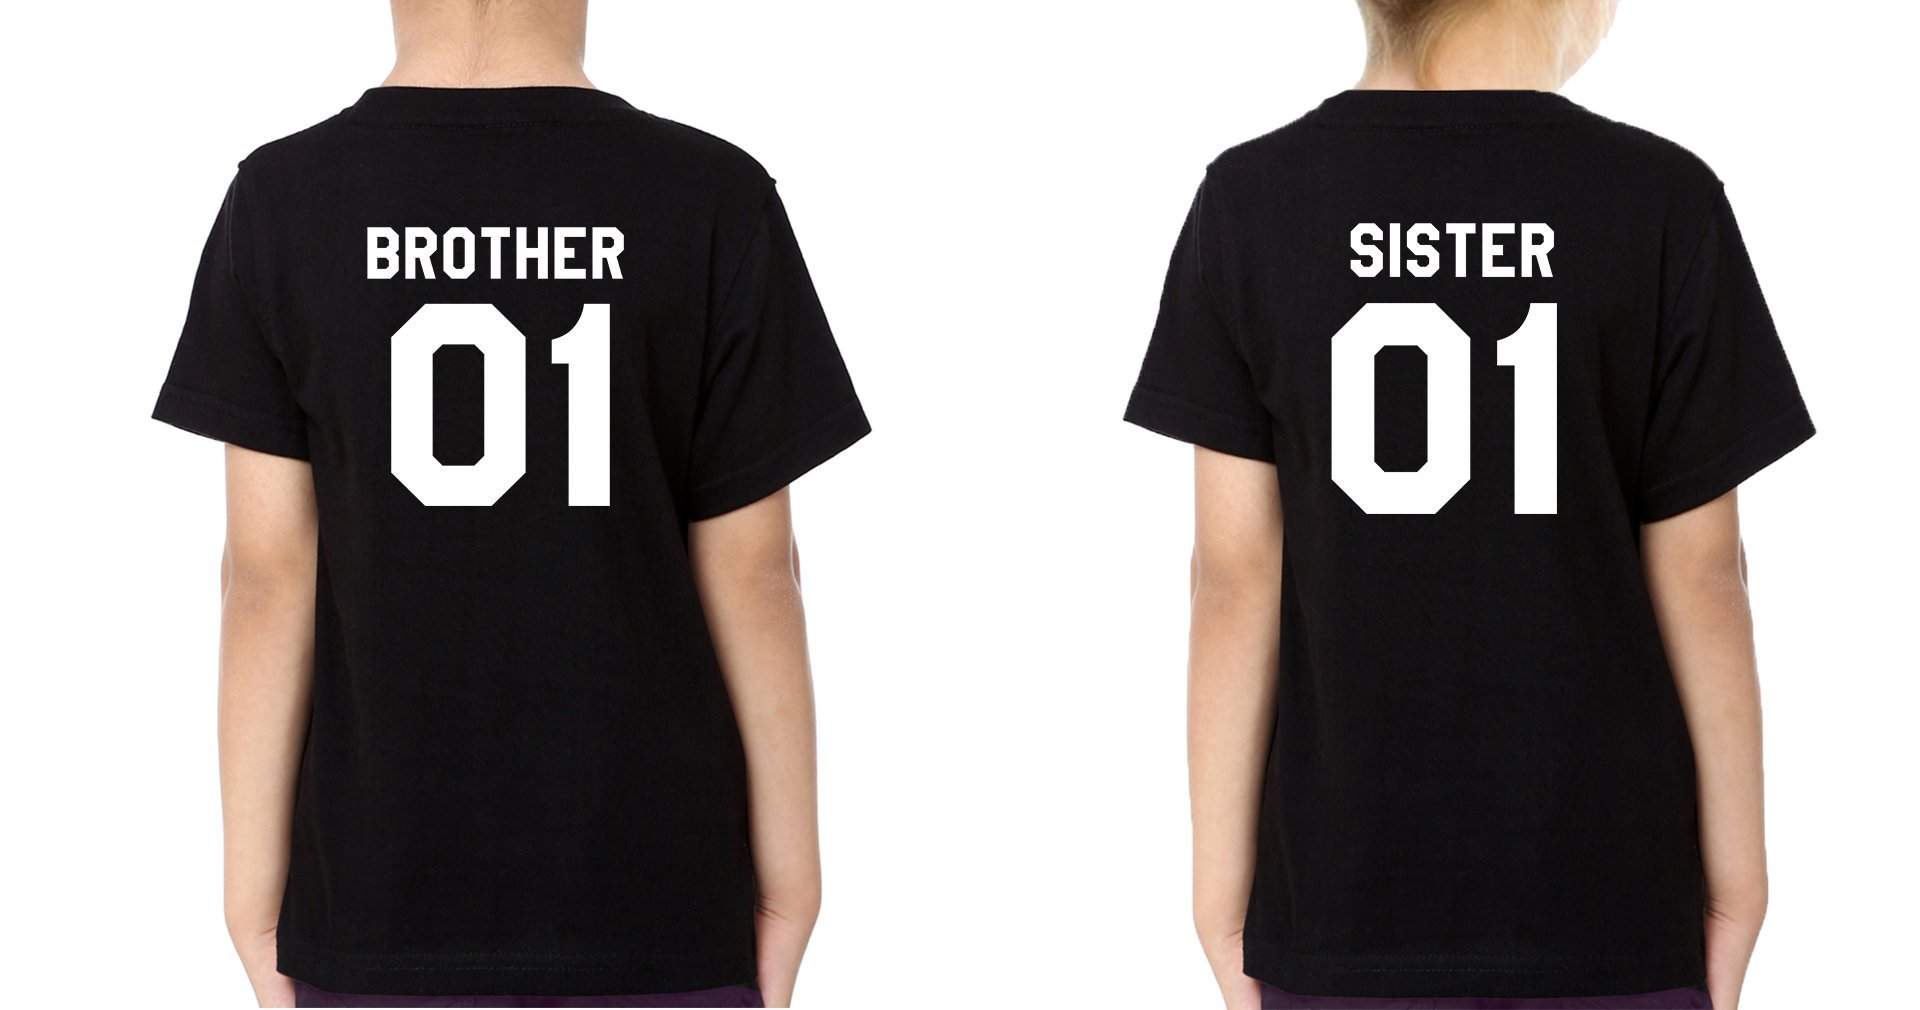 Brother01 Sister02 Brother and Sister Matching T-Shirts- FunkyTradition - FunkyTradition